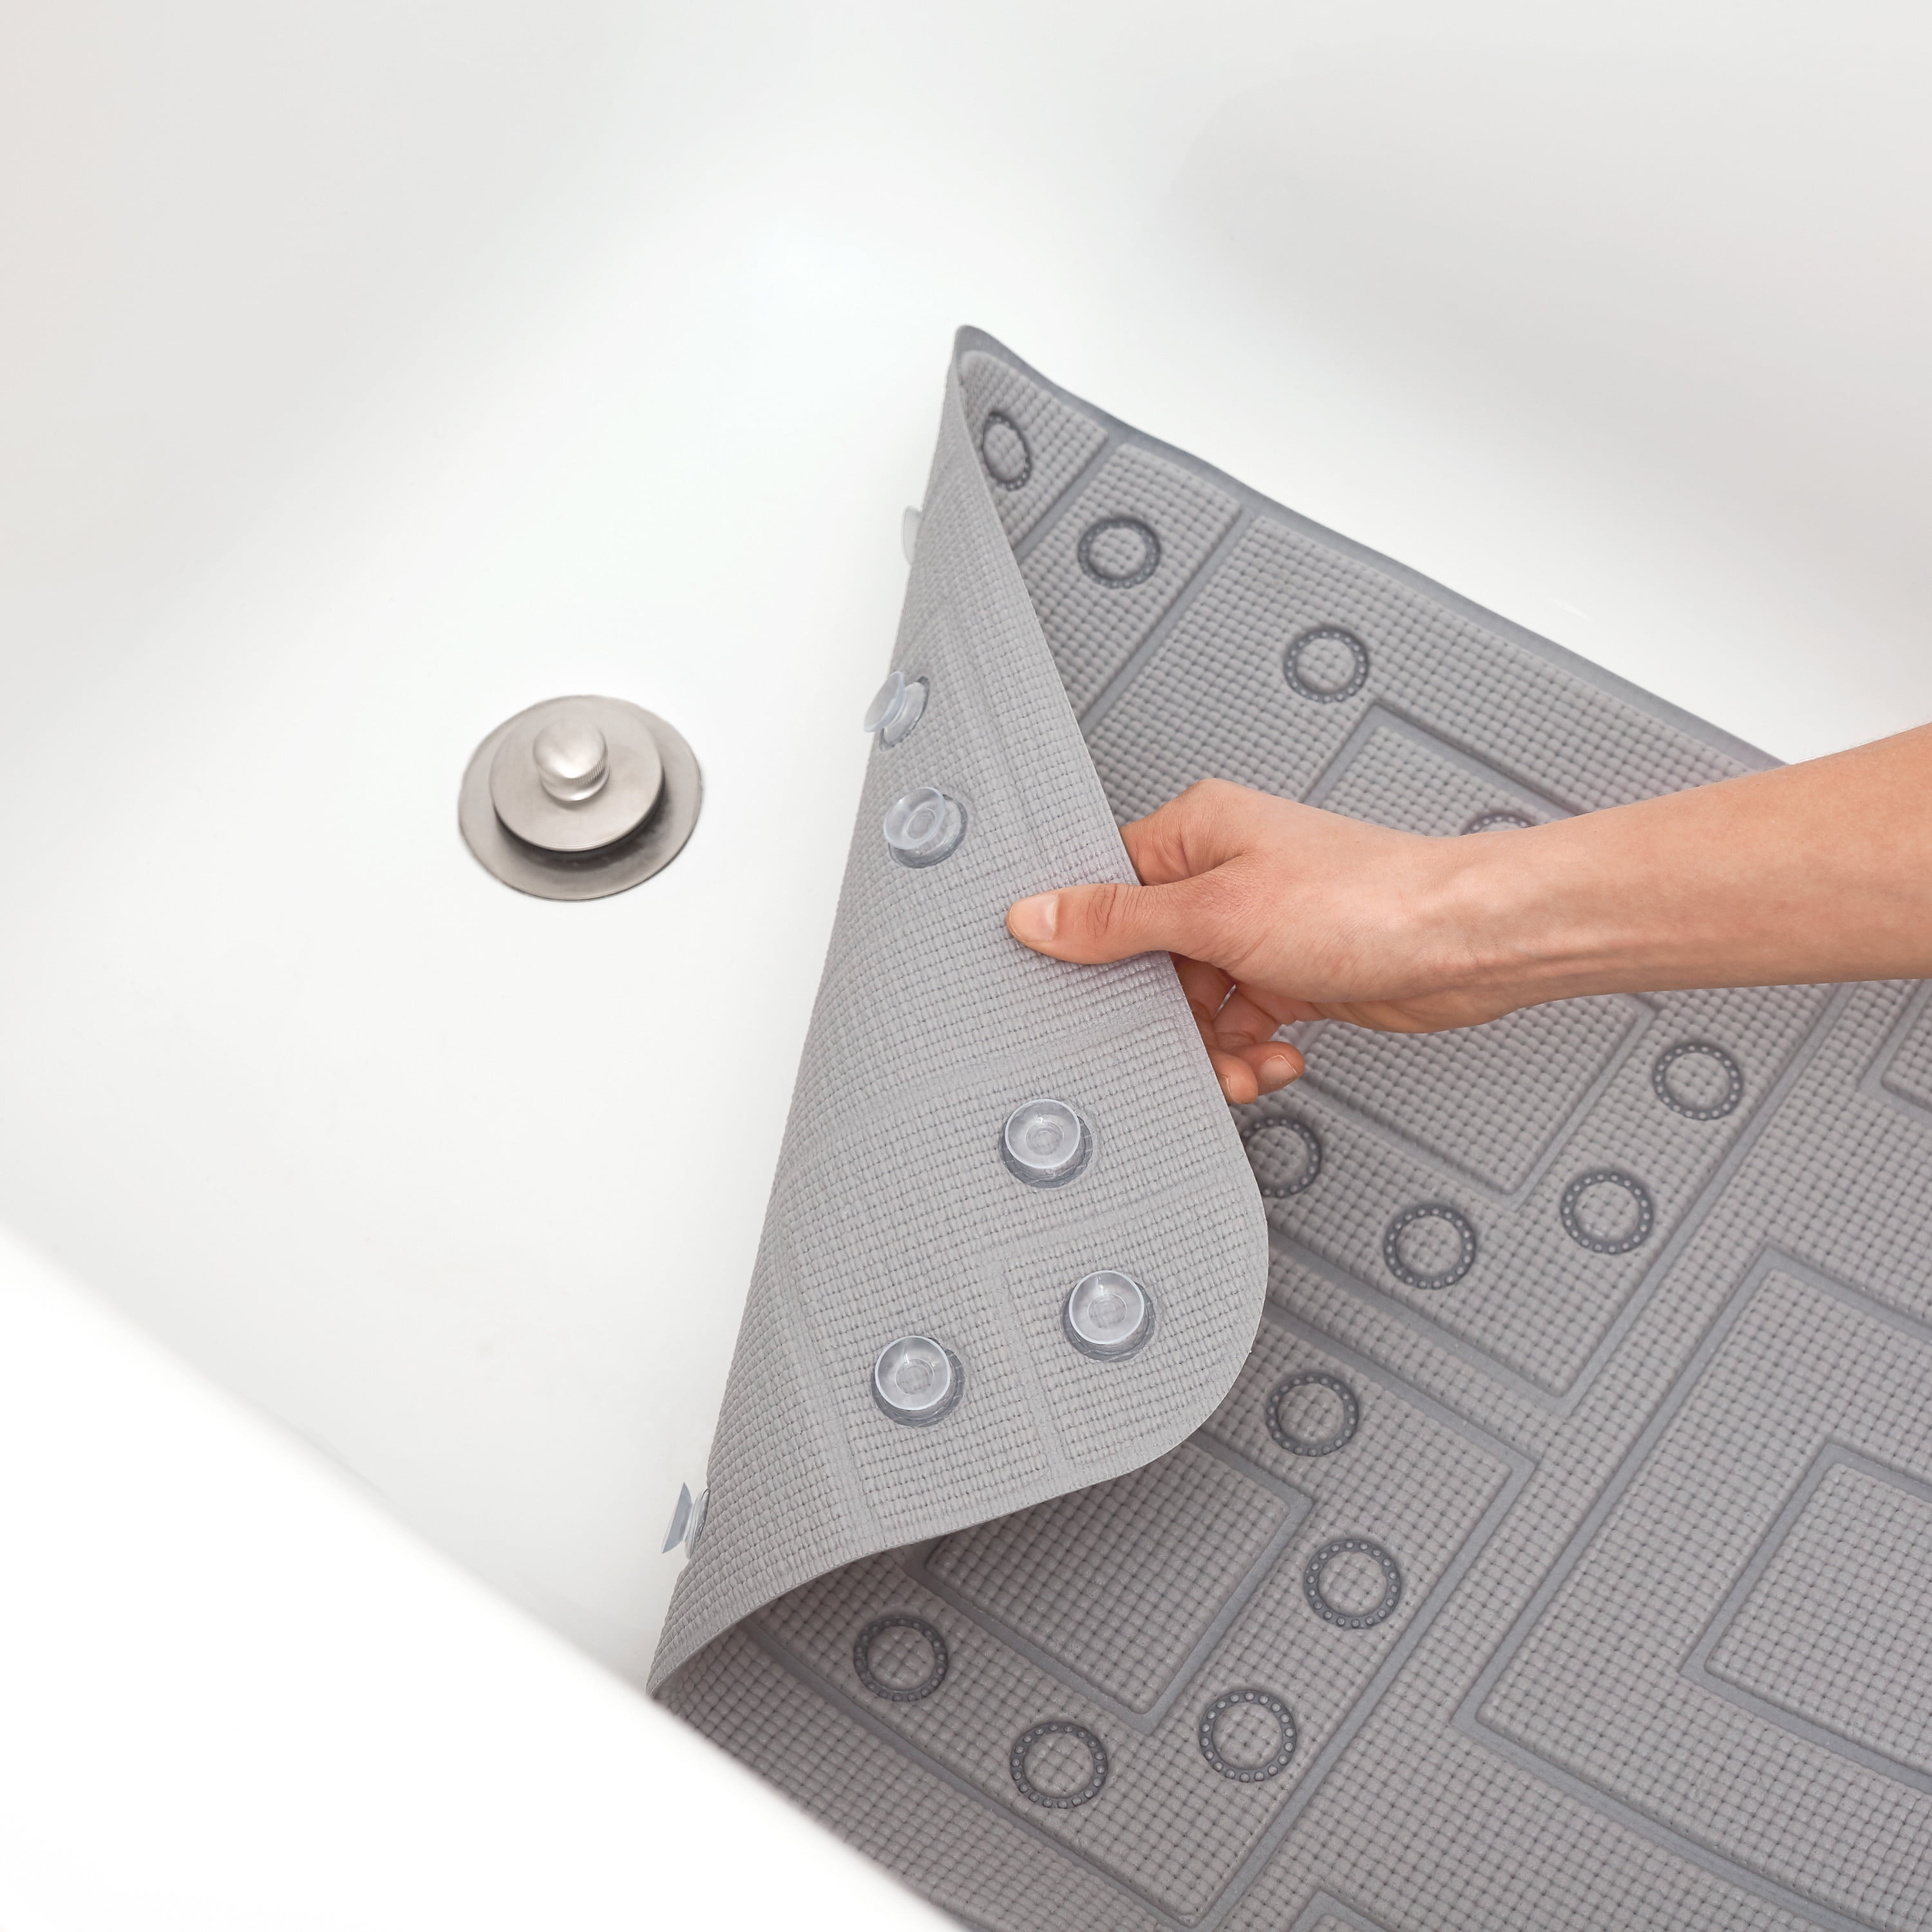 Clorox by Duck Brand Cushioned Foam Bathtub Mat, Non Slip Bath Mat with  Suction Cups For Comfort and Safety, 17 x 36, Taupe